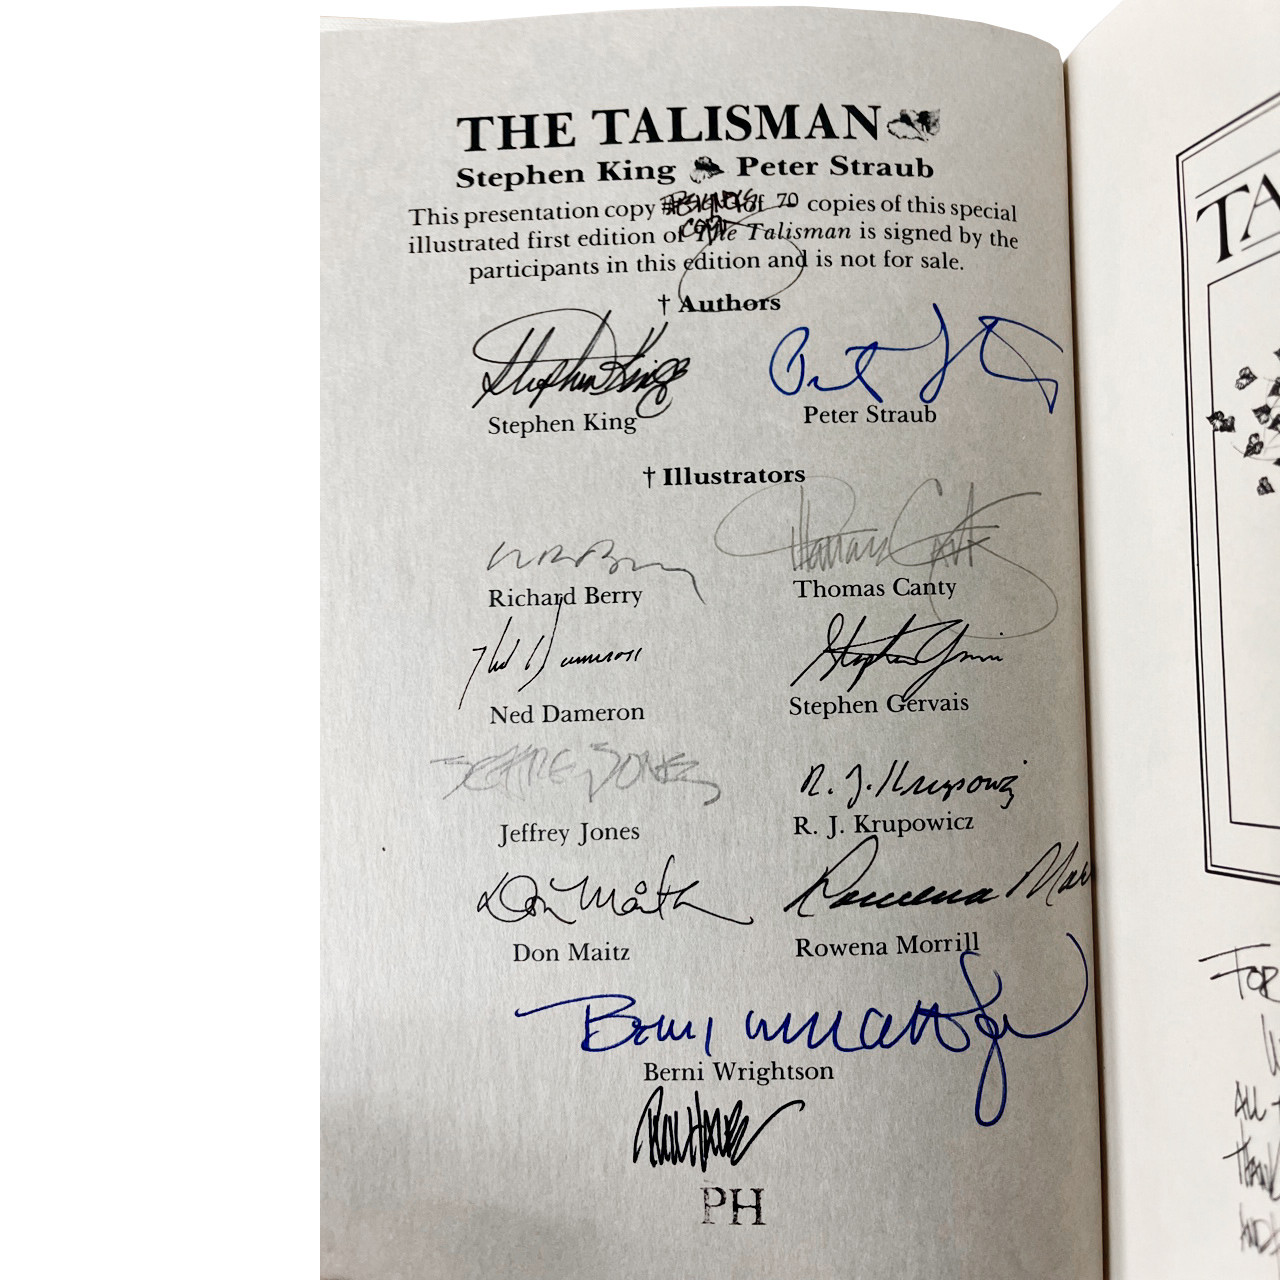 Stephen King, Peter Straub "The Talisman" Slipcased Signed Limited Edition "Designer's Copy" of only 5 w/Publisher Letter